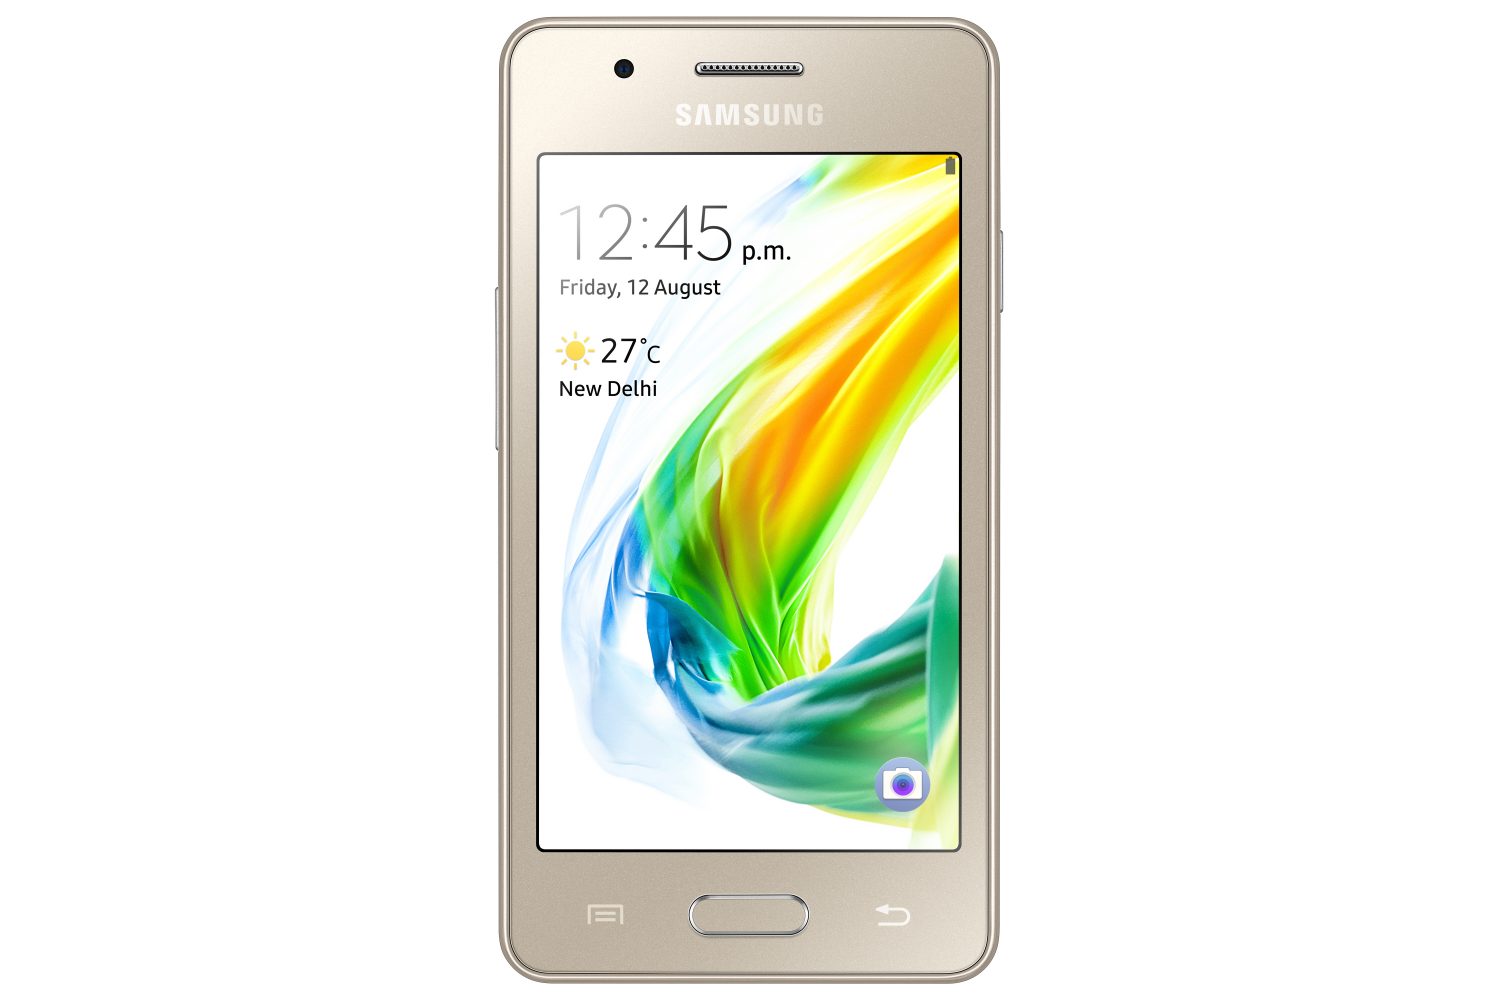 samsung-launches-z2-first-tizen-powered-4g-smartphone-preloaded-jio-services-4